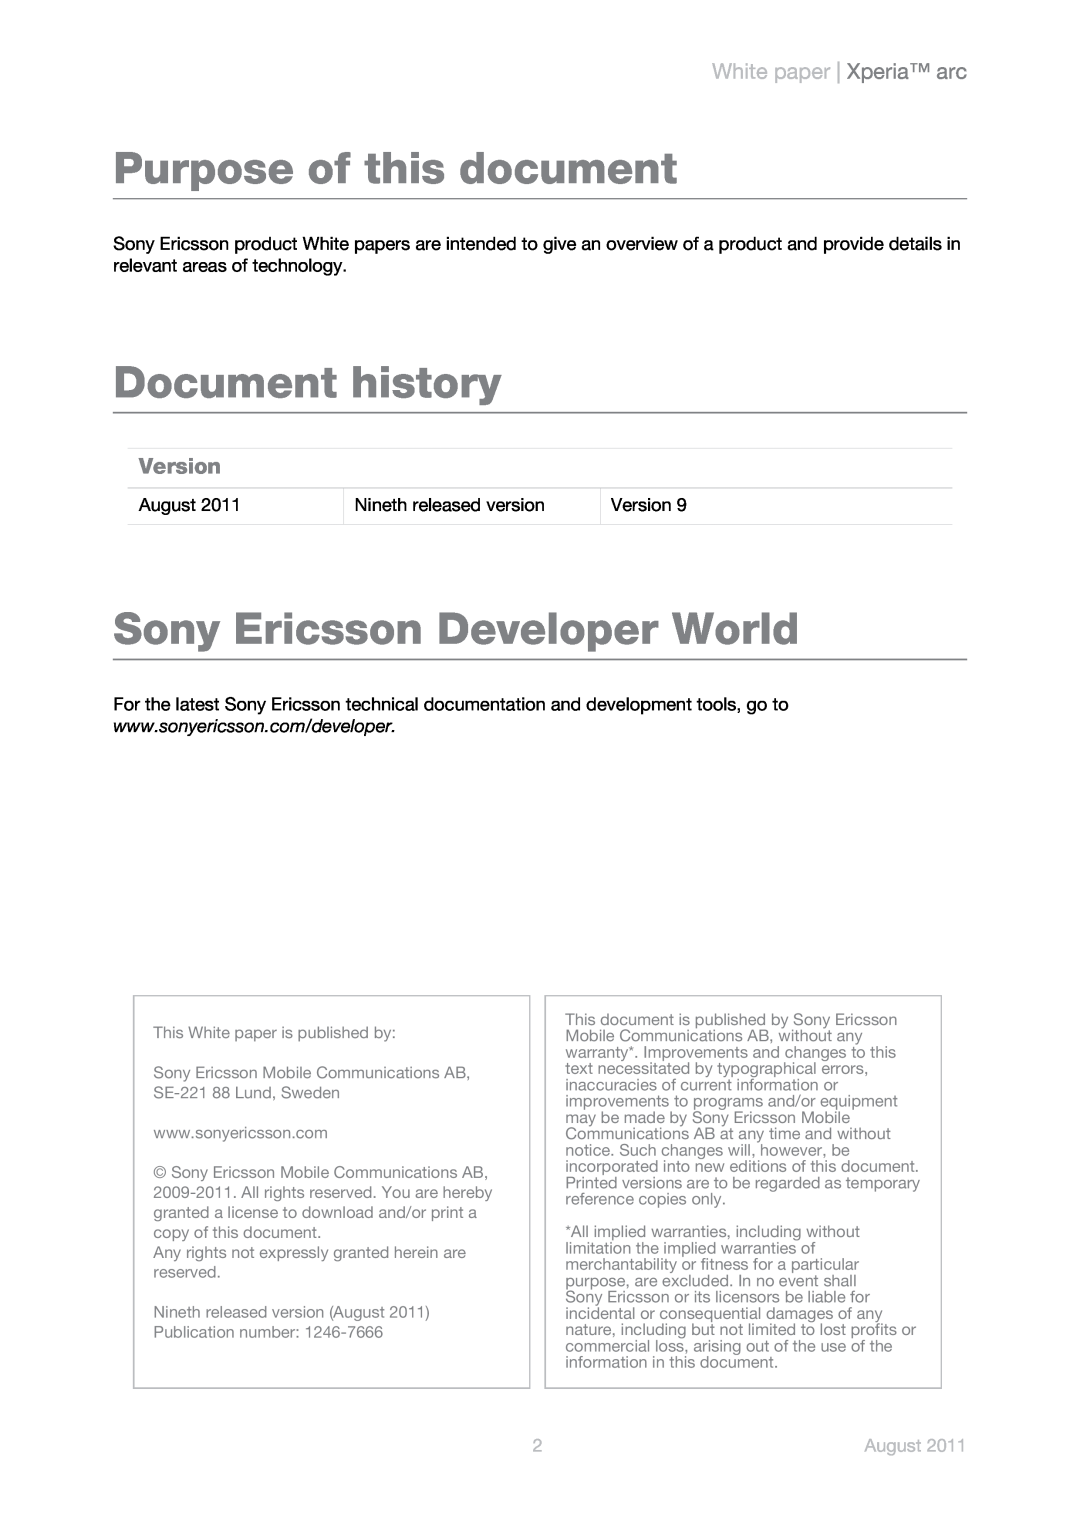 Sony Ericsson LT15a, LT15i manual White paper Xperia arc, Version, August, Purpose of this document, Document history 